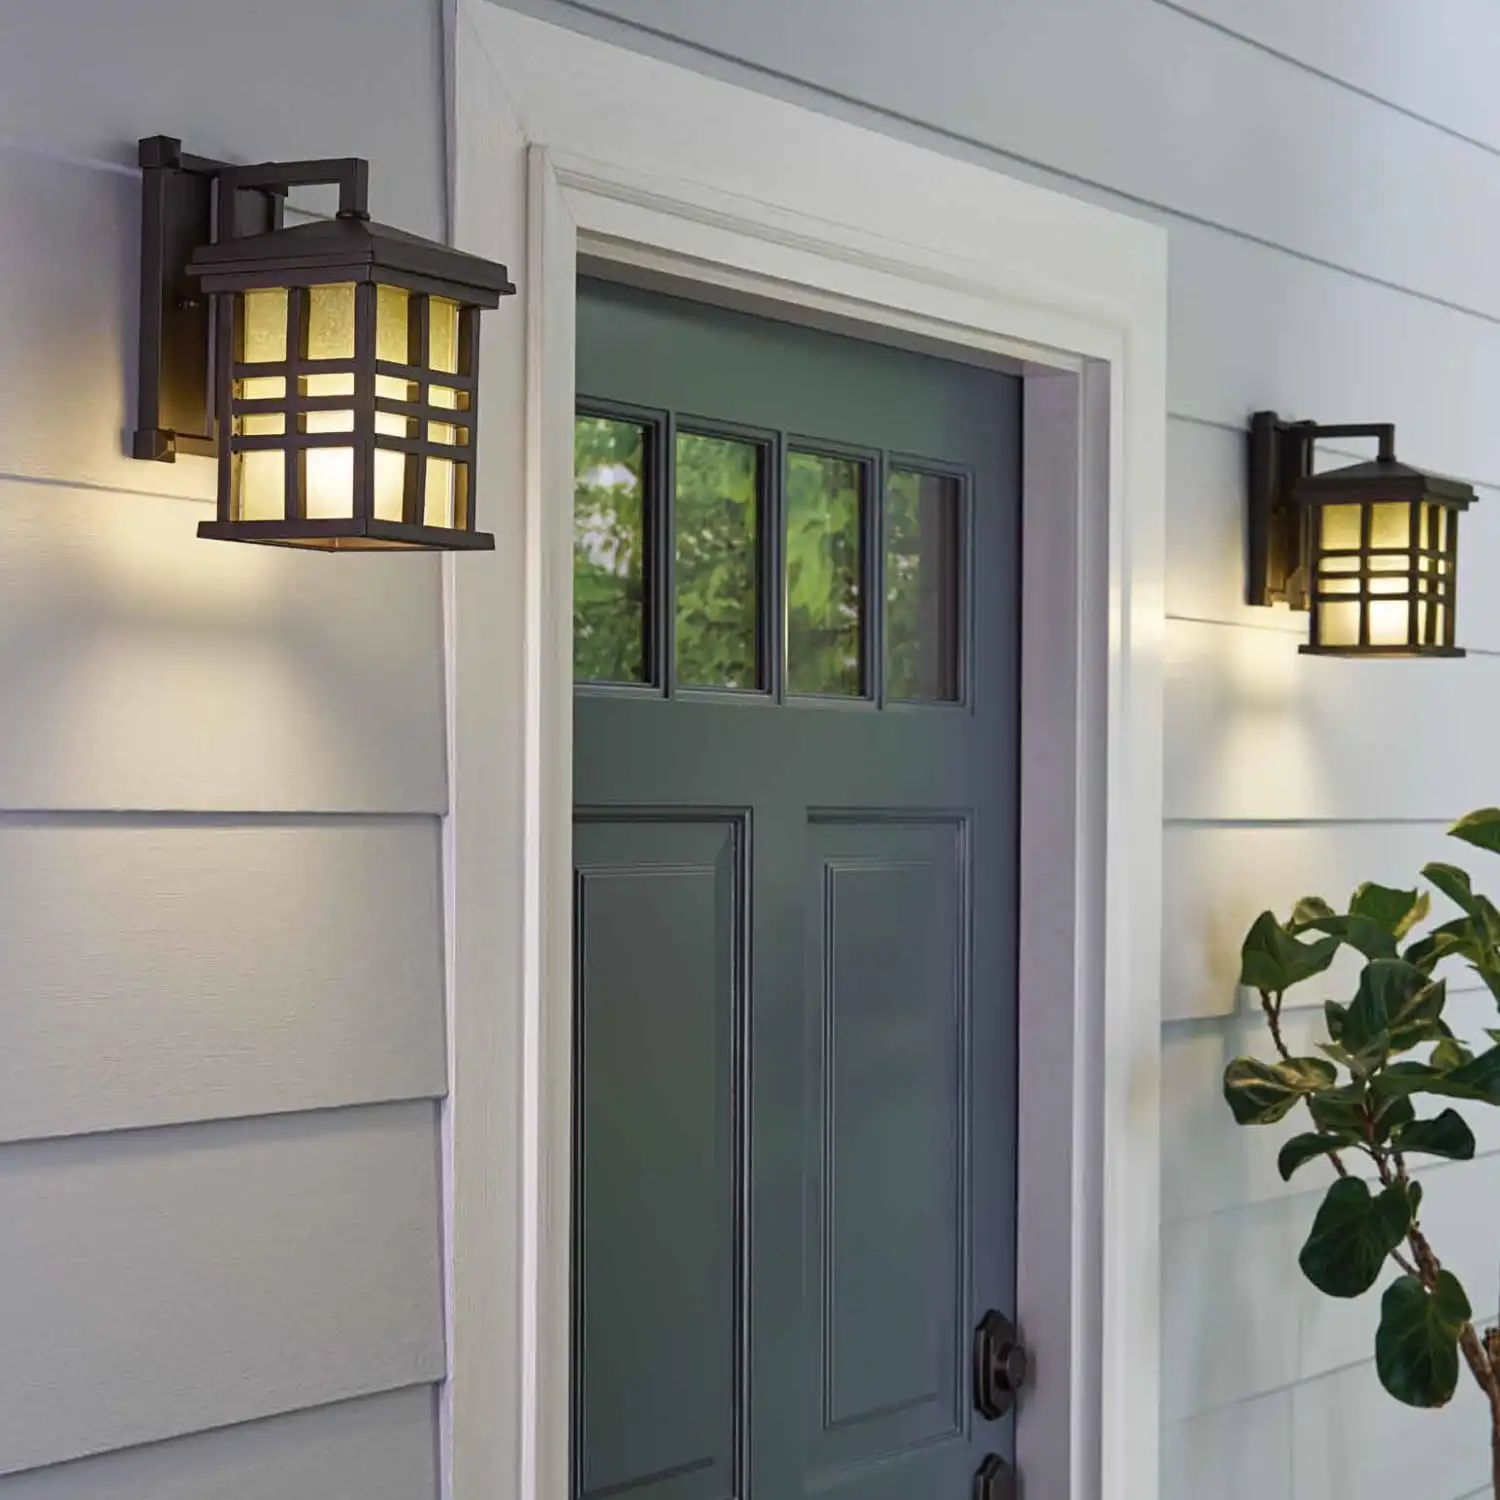 

BH&G Traditional Hardwired Outdoor A19 Wall Sconce Light, 8W /60W Equiv Bronze Glass Shade 1-Light